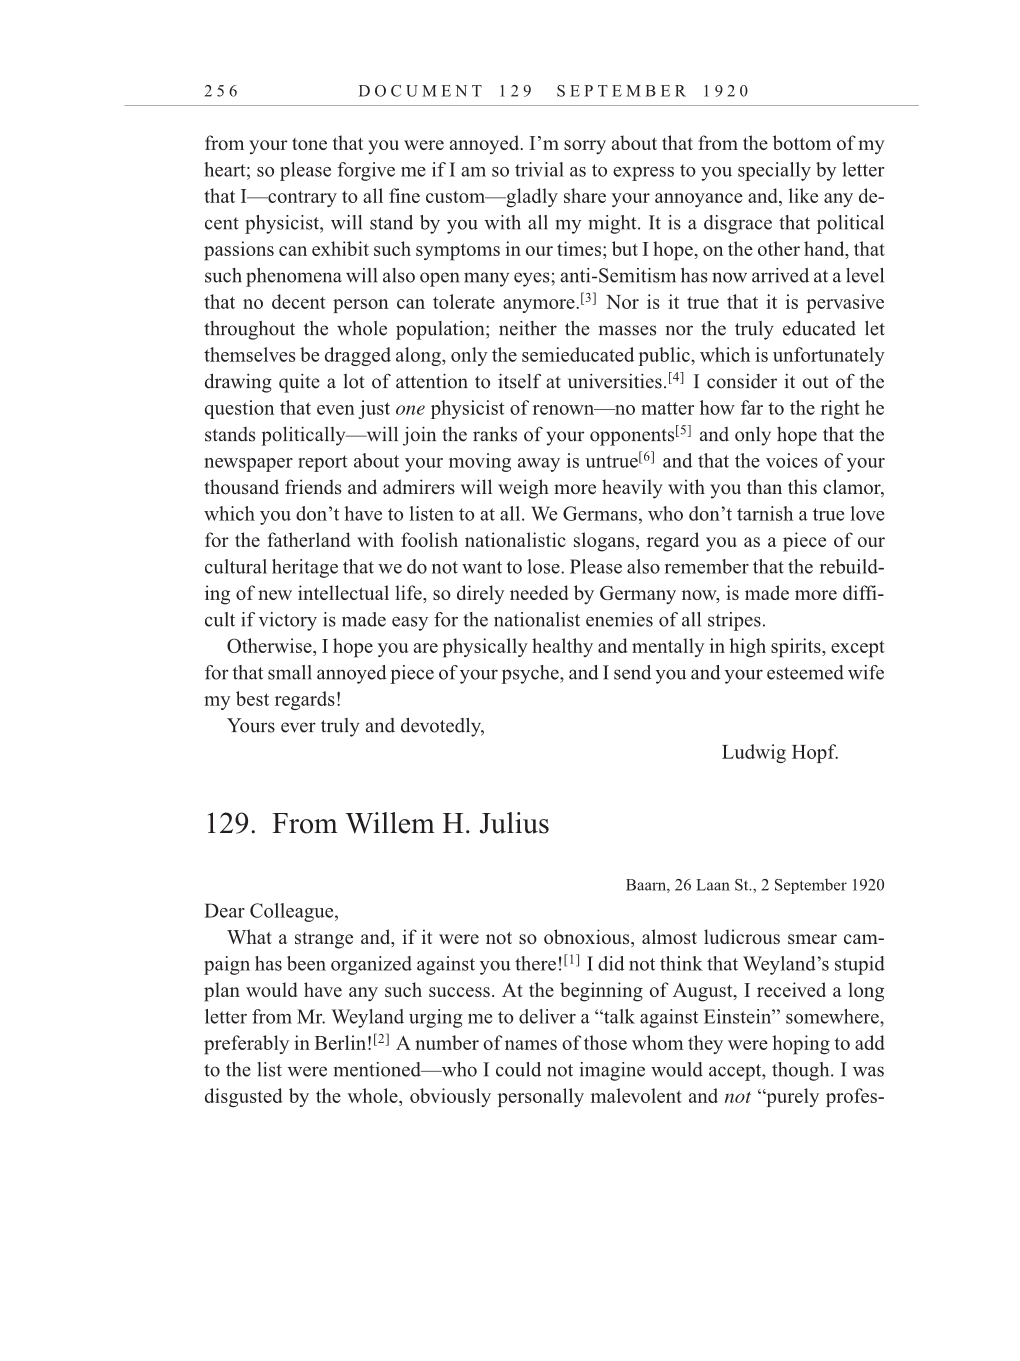 Volume 10: The Berlin Years: Correspondence, May-December 1920, and Supplementary Correspondence, 1909-1920 (English translation supplement) page 256